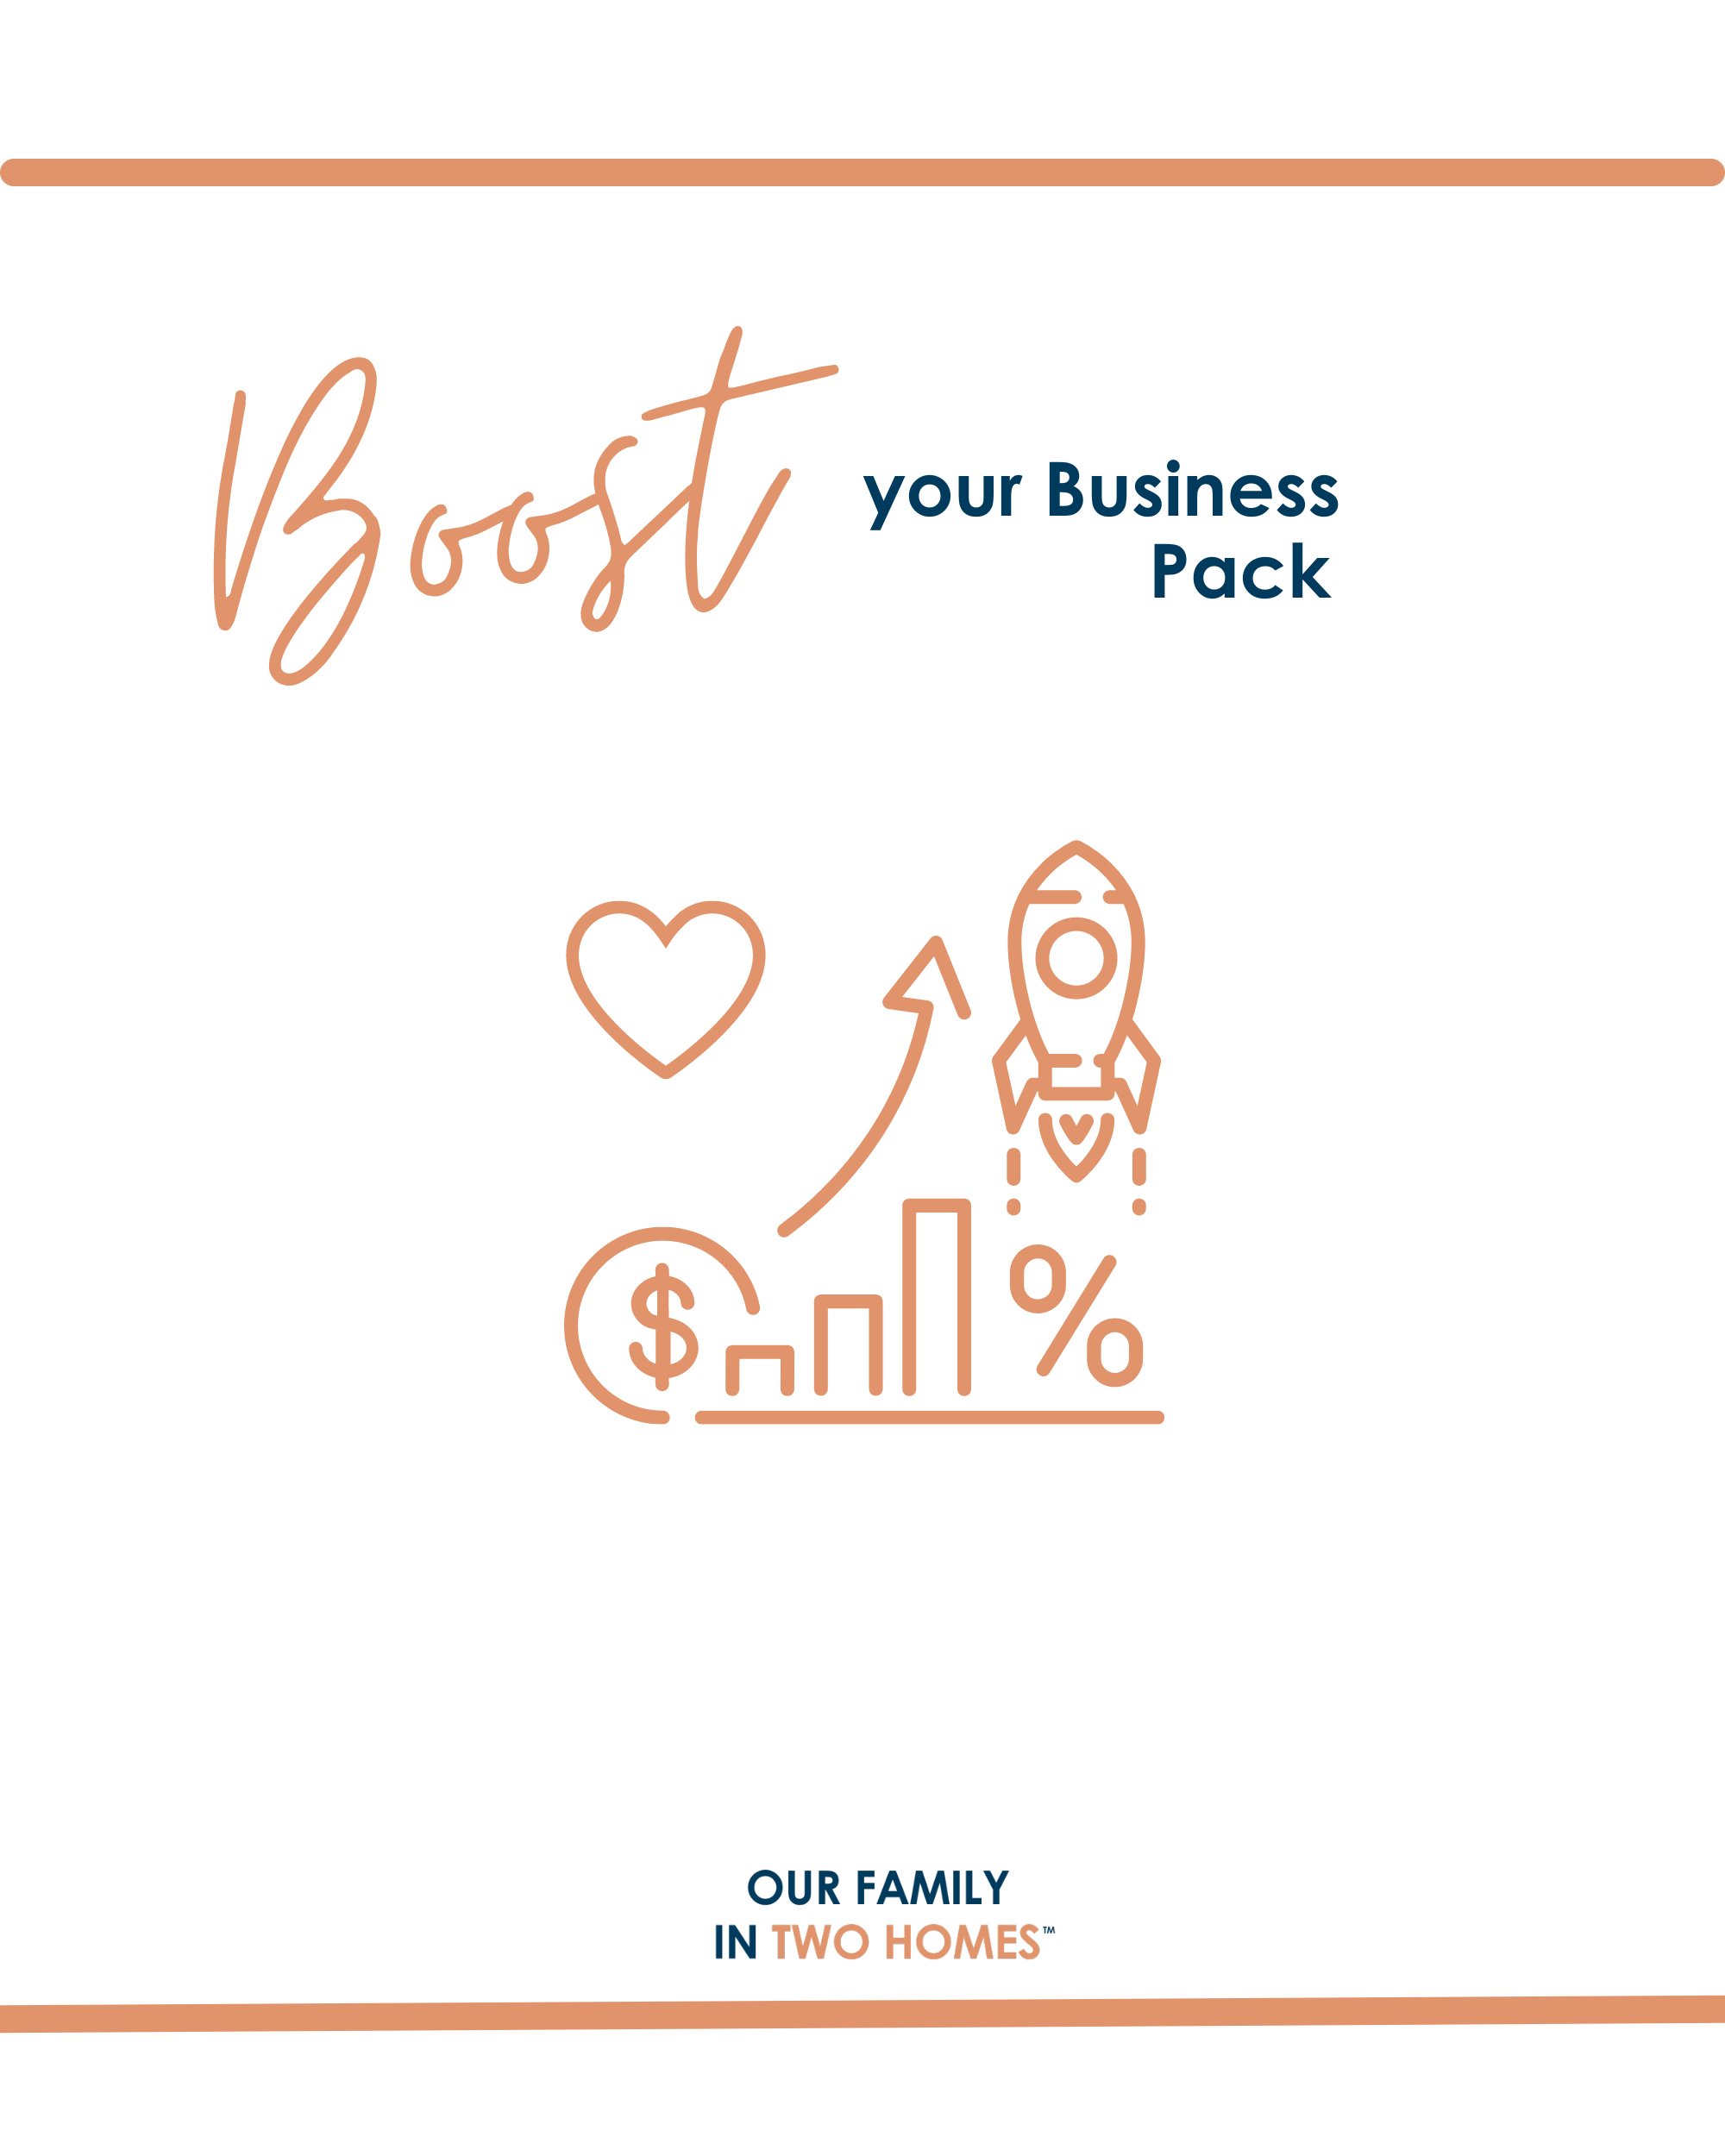 Boost your Business Pack